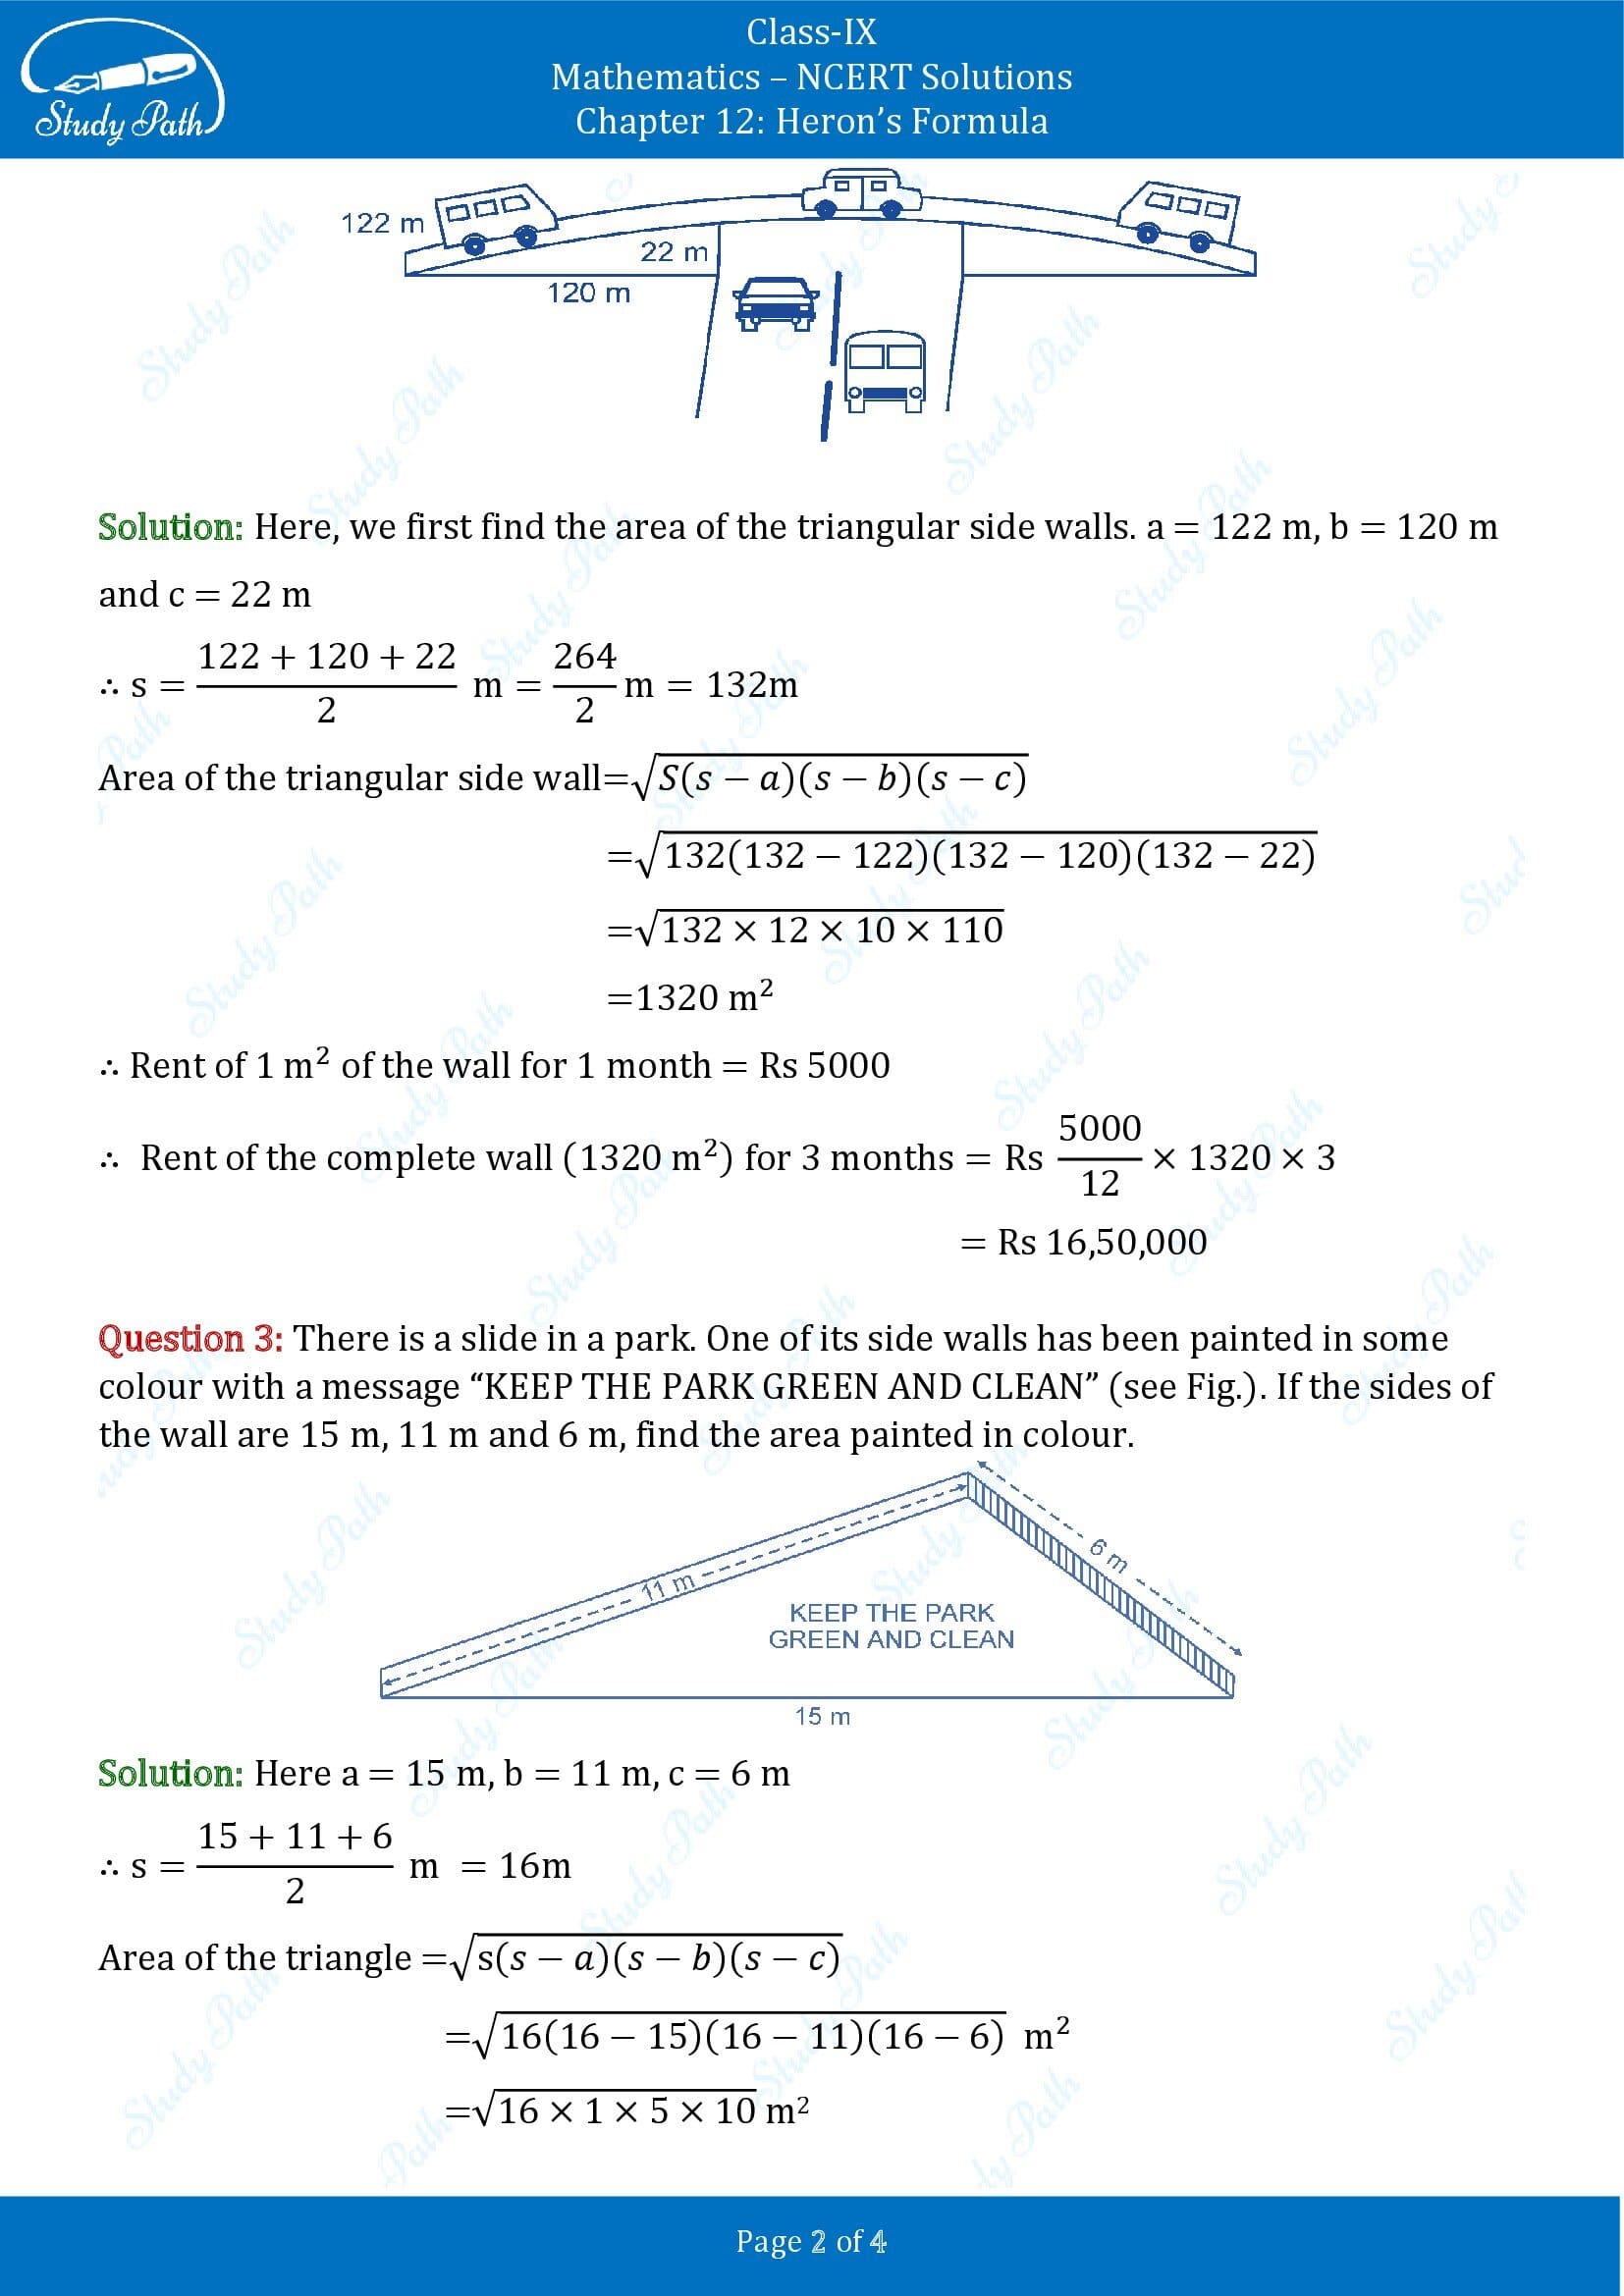 NCERT Solutions for Class 9 Maths Chapter 12 Herons Formula Exercise 12.1 00002